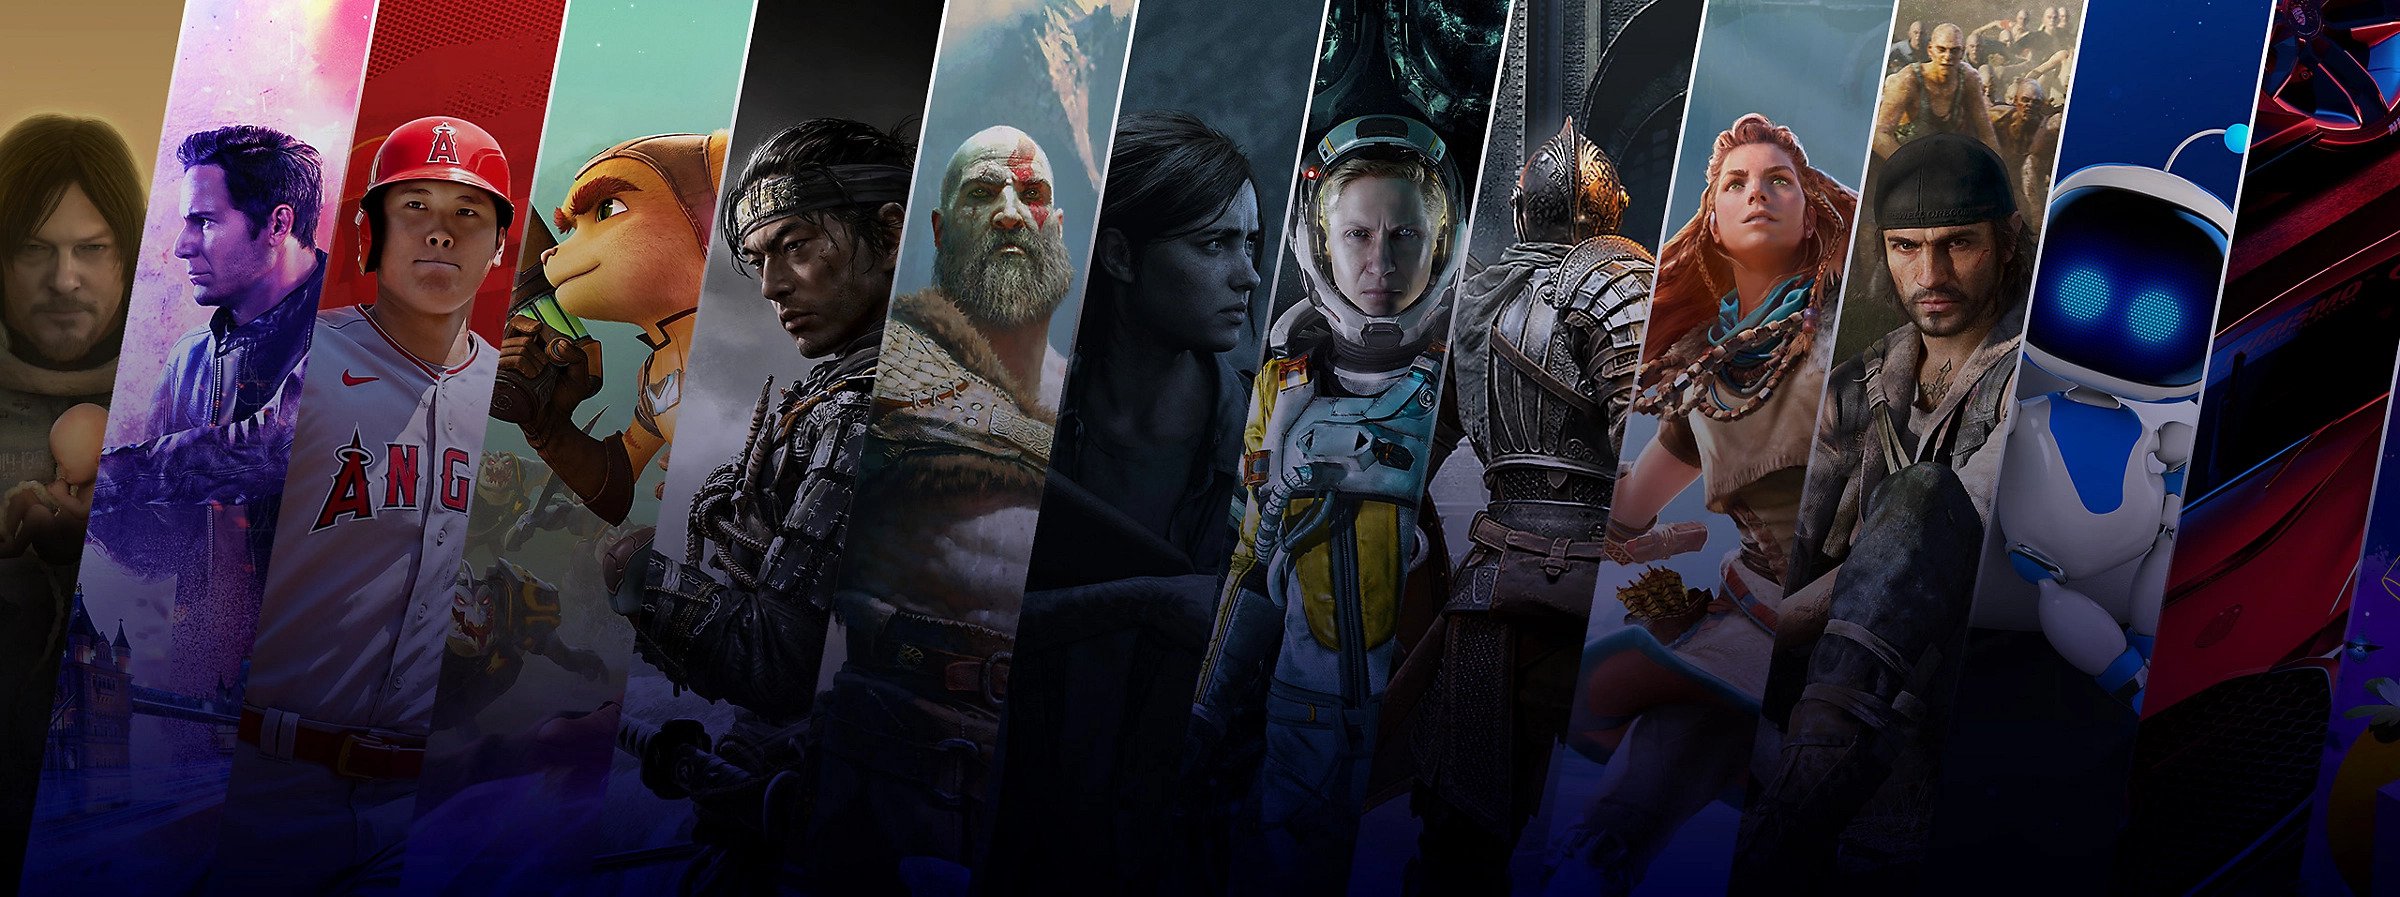 The PlayStation Studios website banner has added Death Stranding, leading  to acquisition speculation | VGC